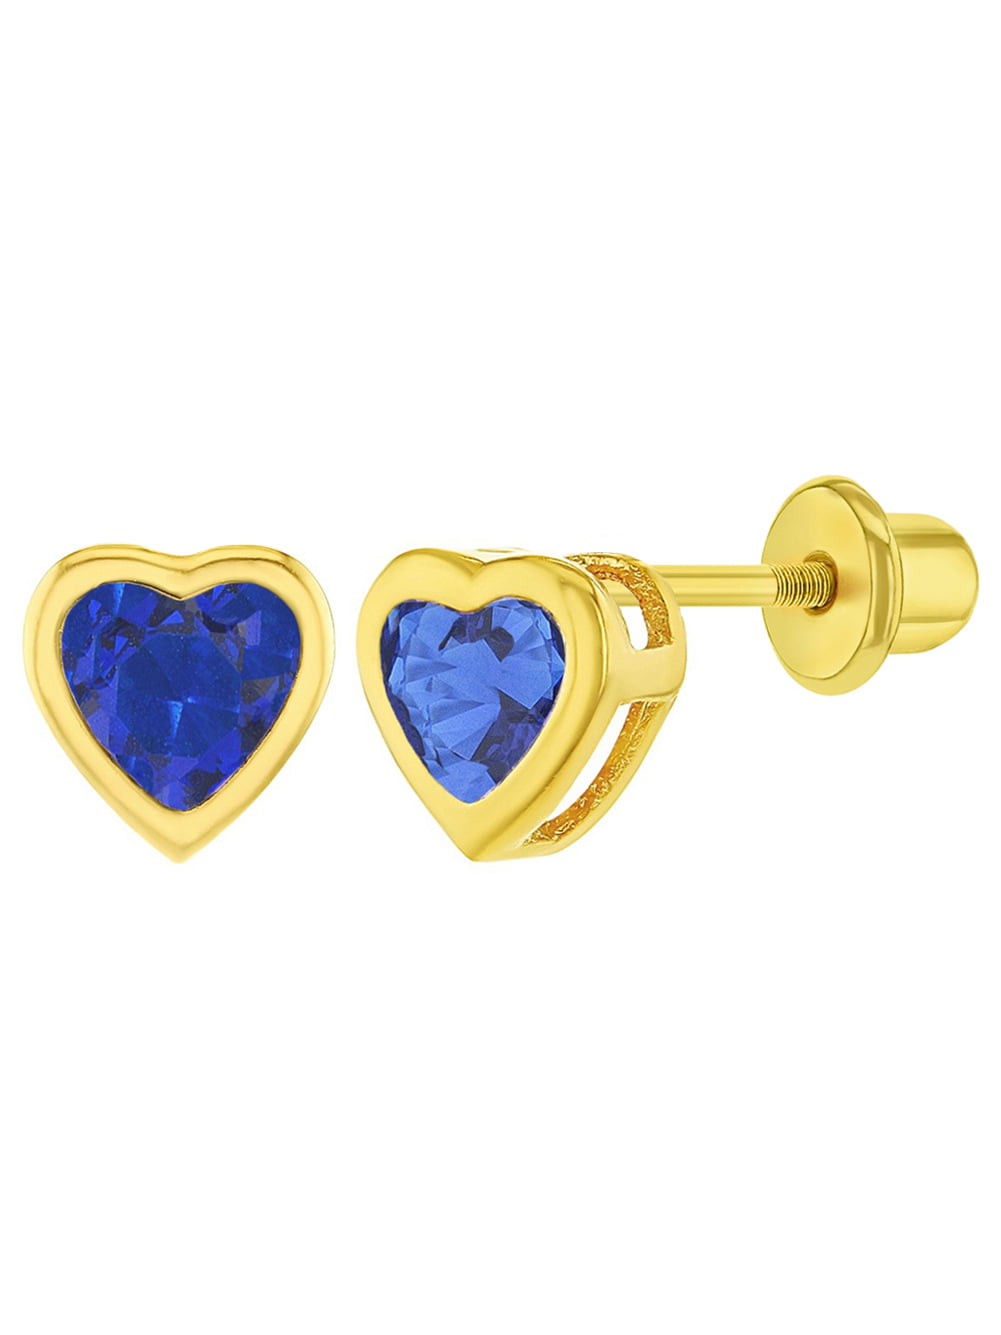 and Little Girls Gold Plated Little Plain Heart Safety Screw Back Earrings for Infants Gorgeous Small Plain Heart Screw Back Studs for Kids Toddlers Jewelry for Casual or Formal Occasion 